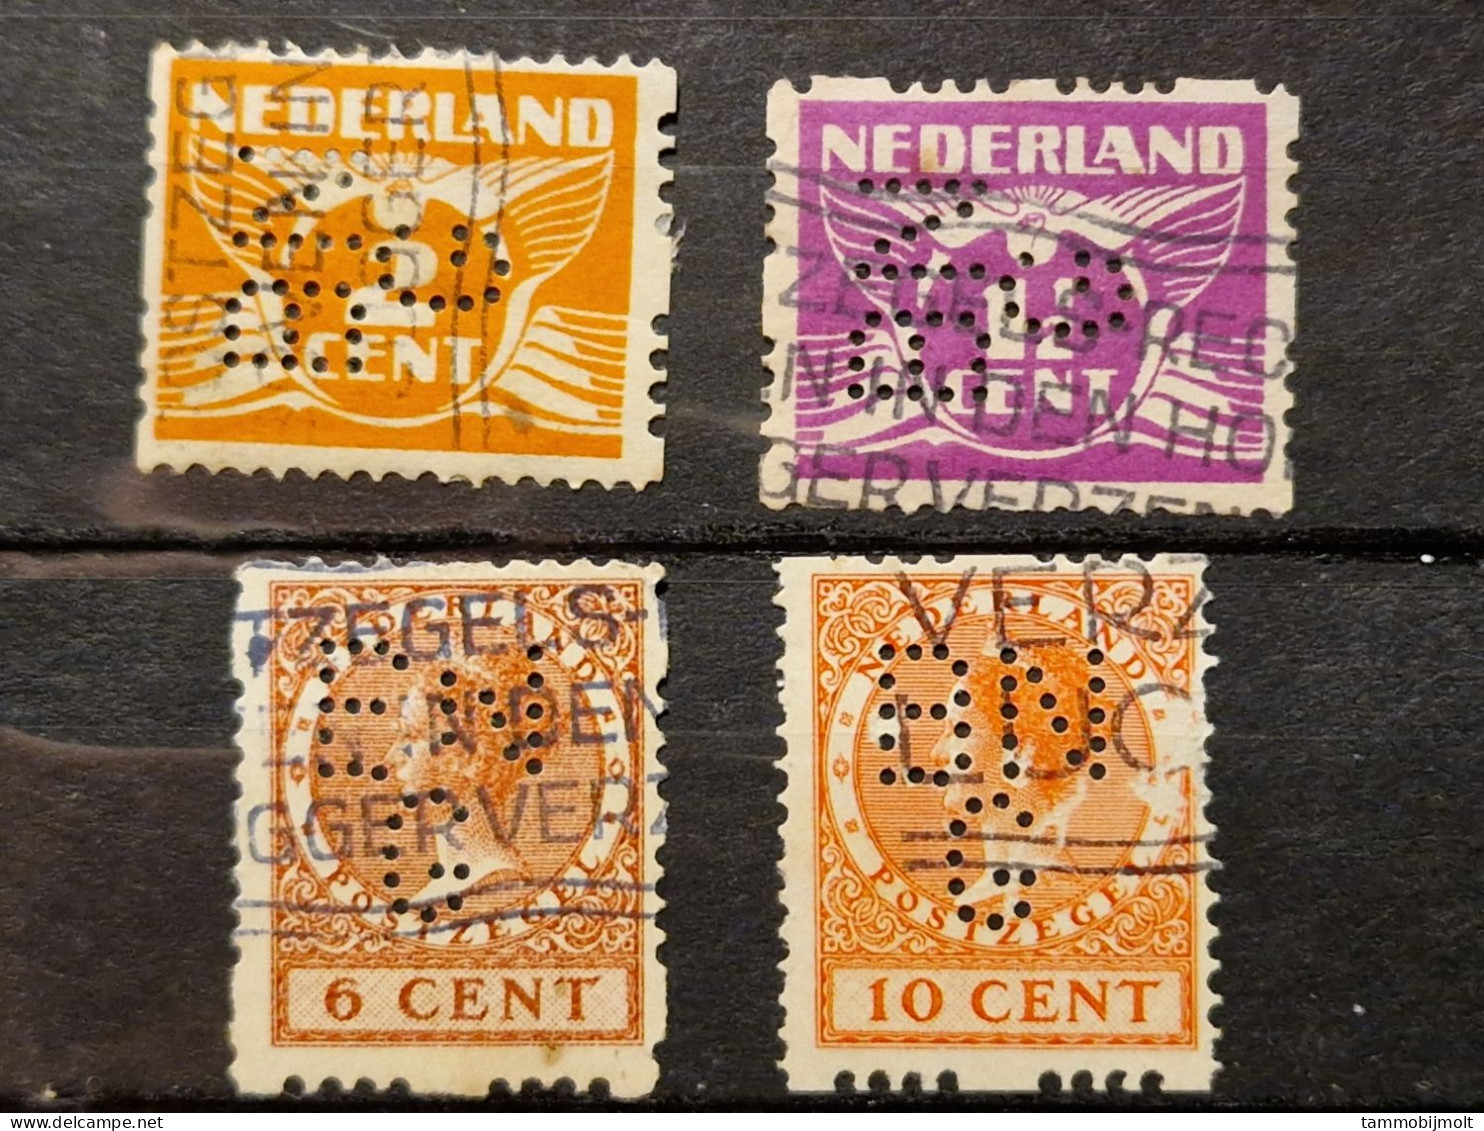 Netherlands, Nederland; Roltanding; POKO Perfins BNG; 4 Different Stamps - Unclassified